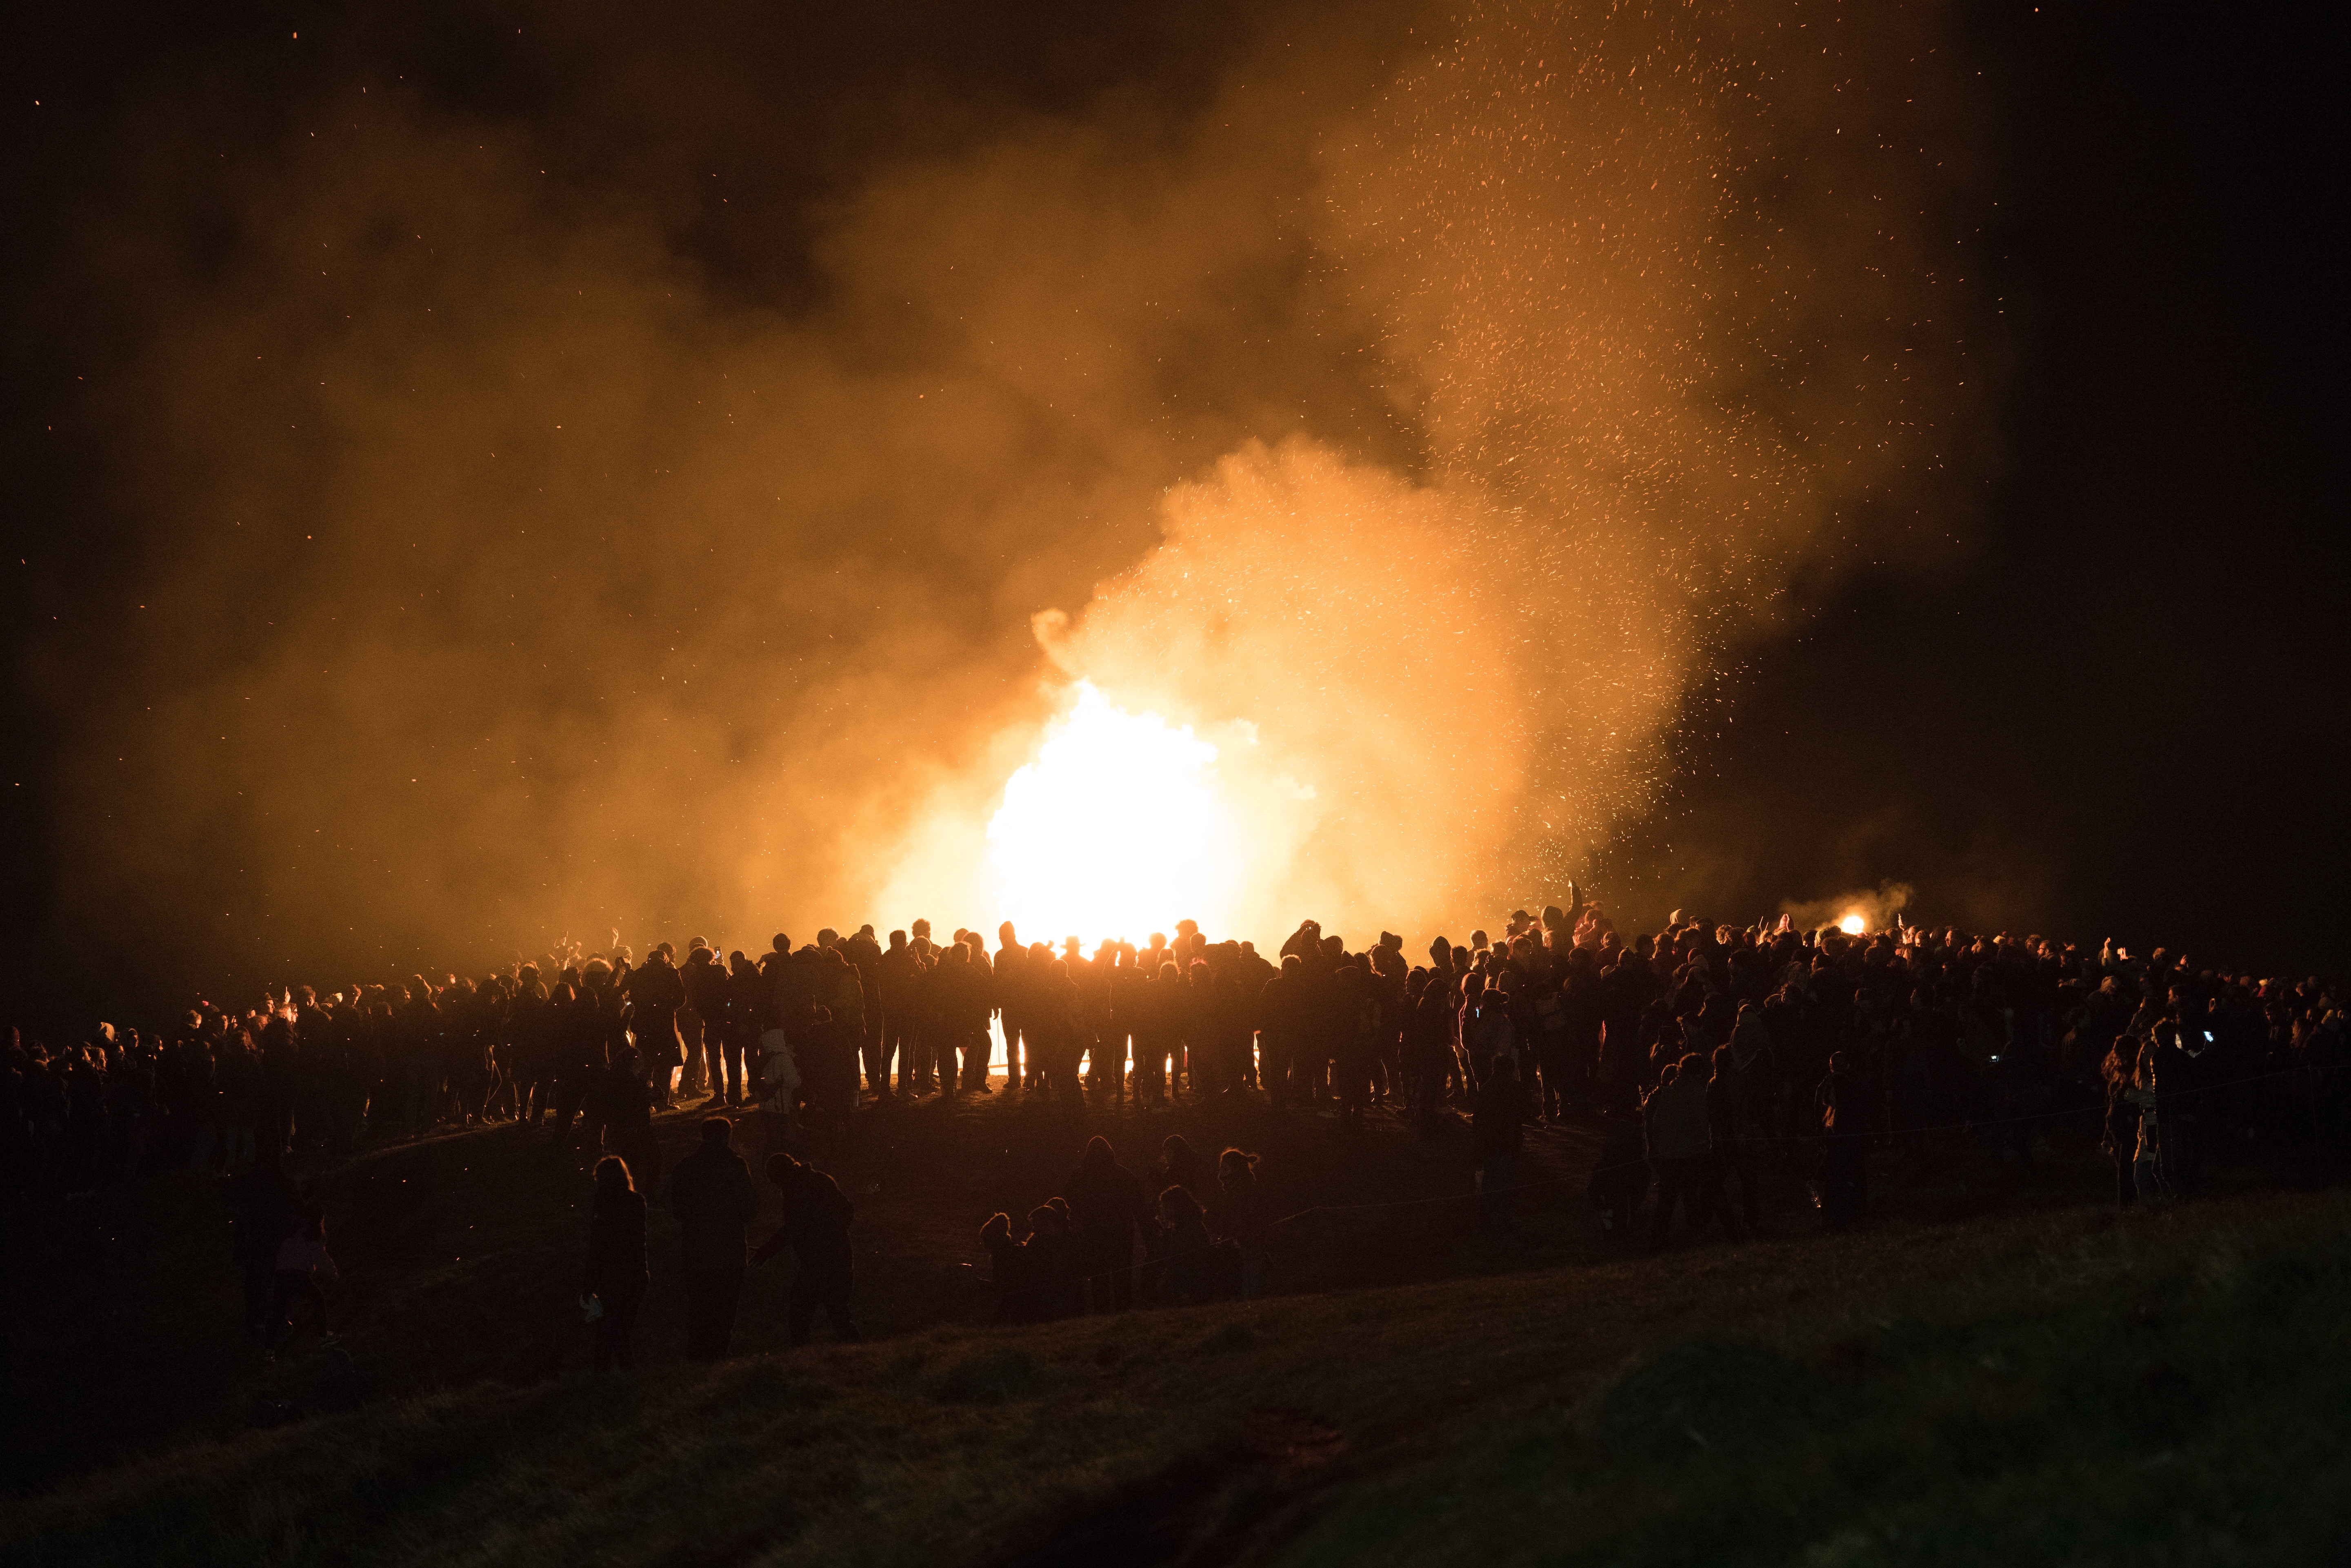 A large number of people are in silhouette against the blaze of a bonfire